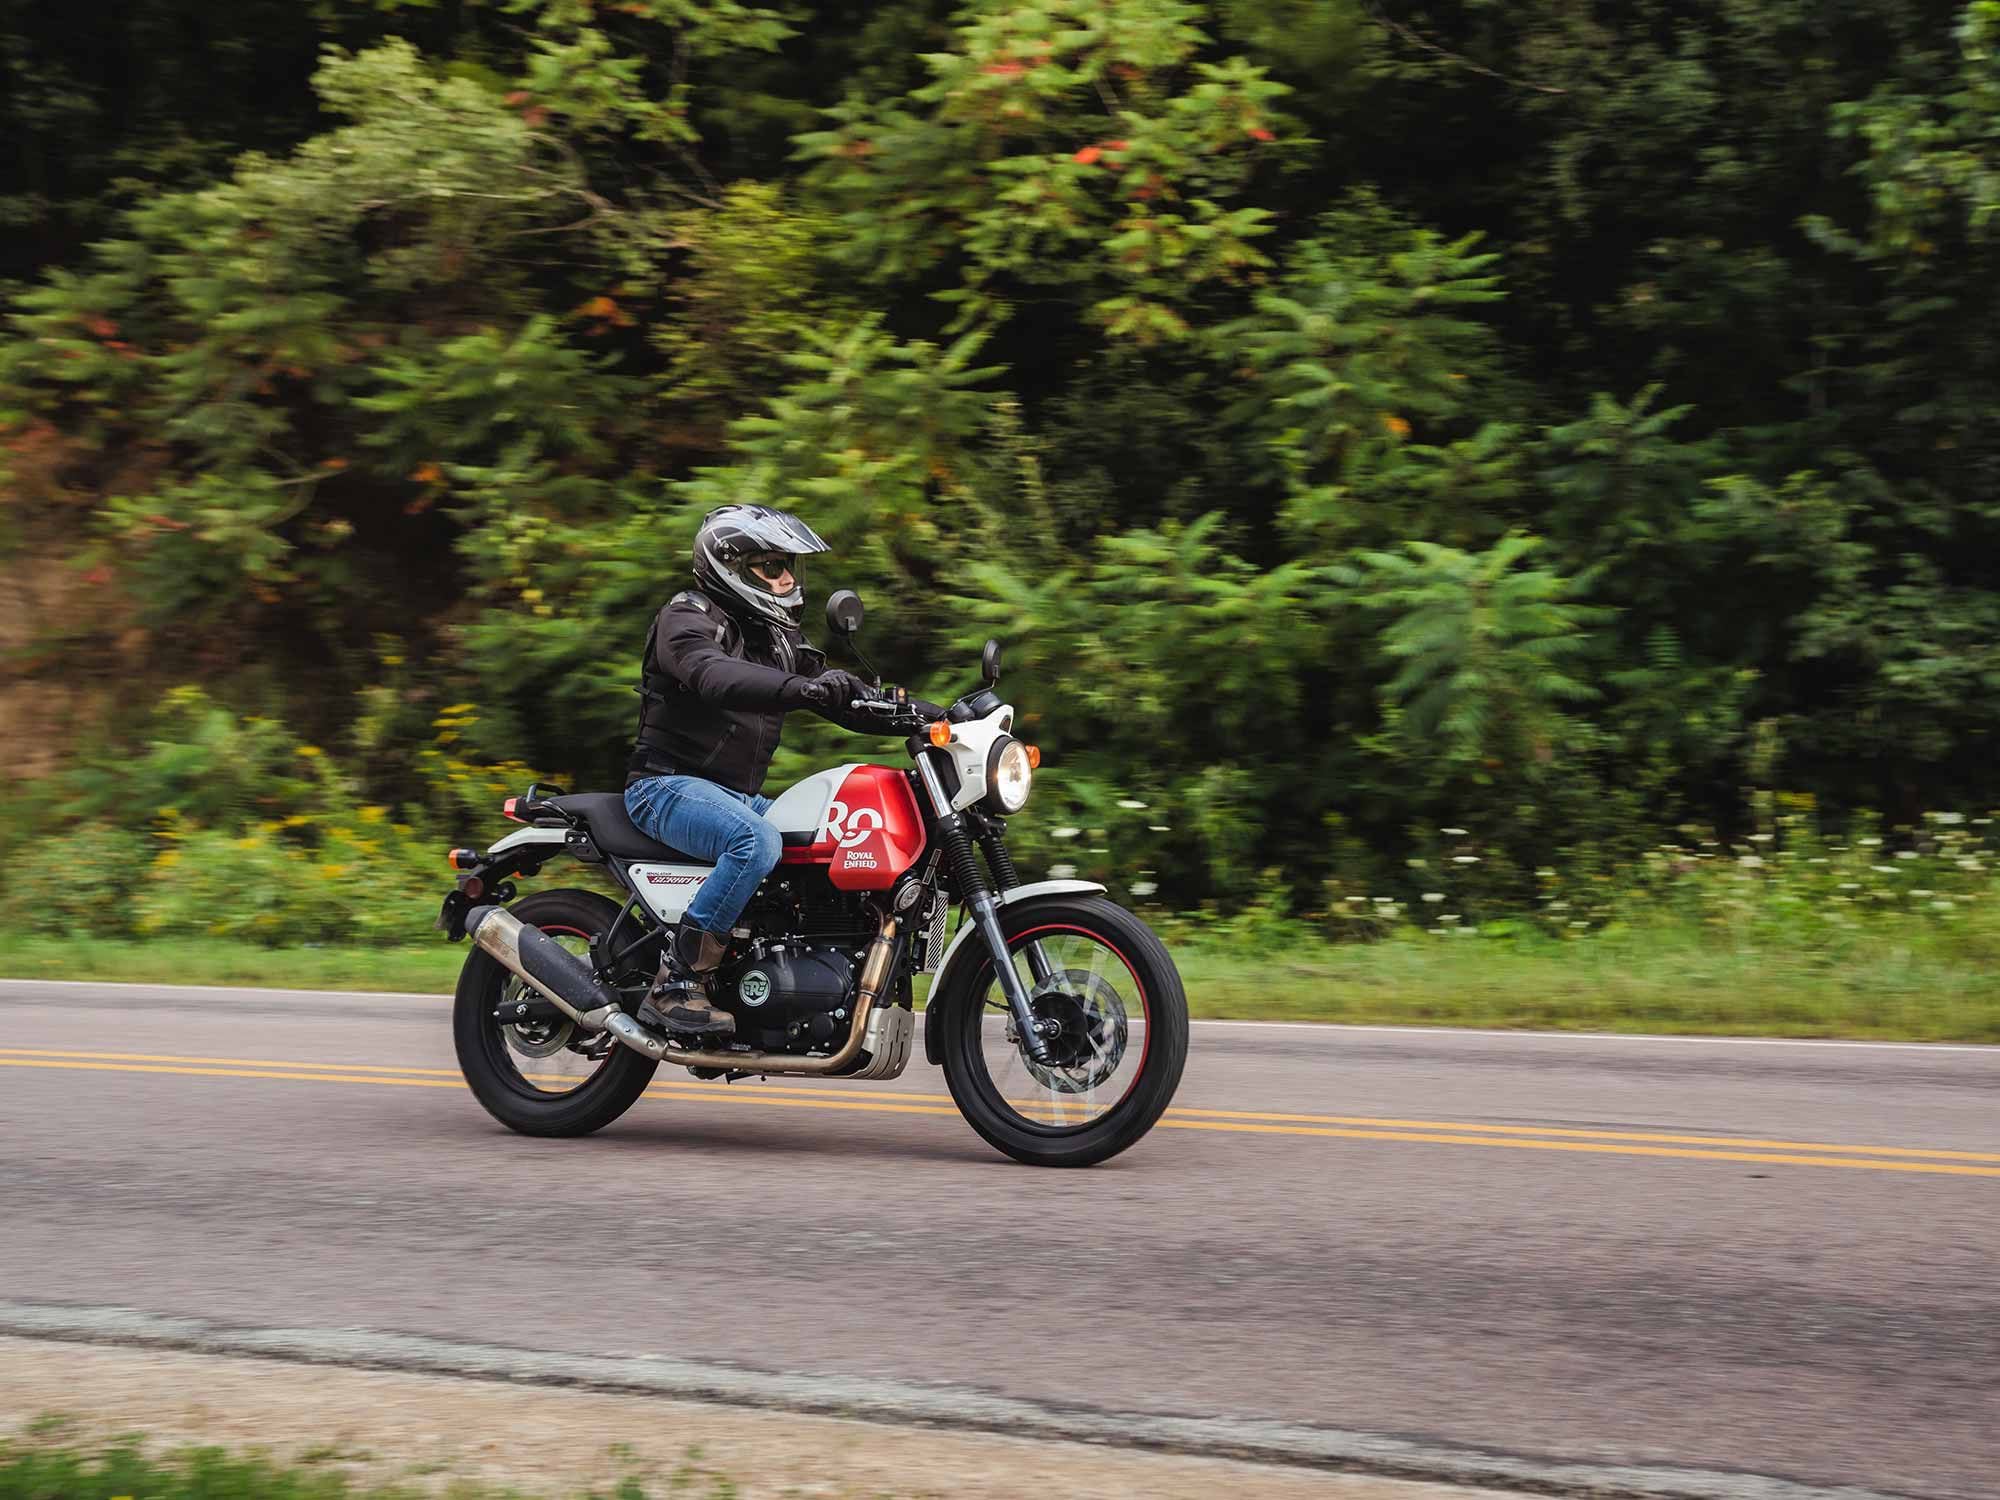 Less weight, lower bars, and a smaller front wheel make the Scram easier to maneuver than the Himalayan. At 5-foot-7, the author has plenty of room in the cockpit and an easy reach to the controls.